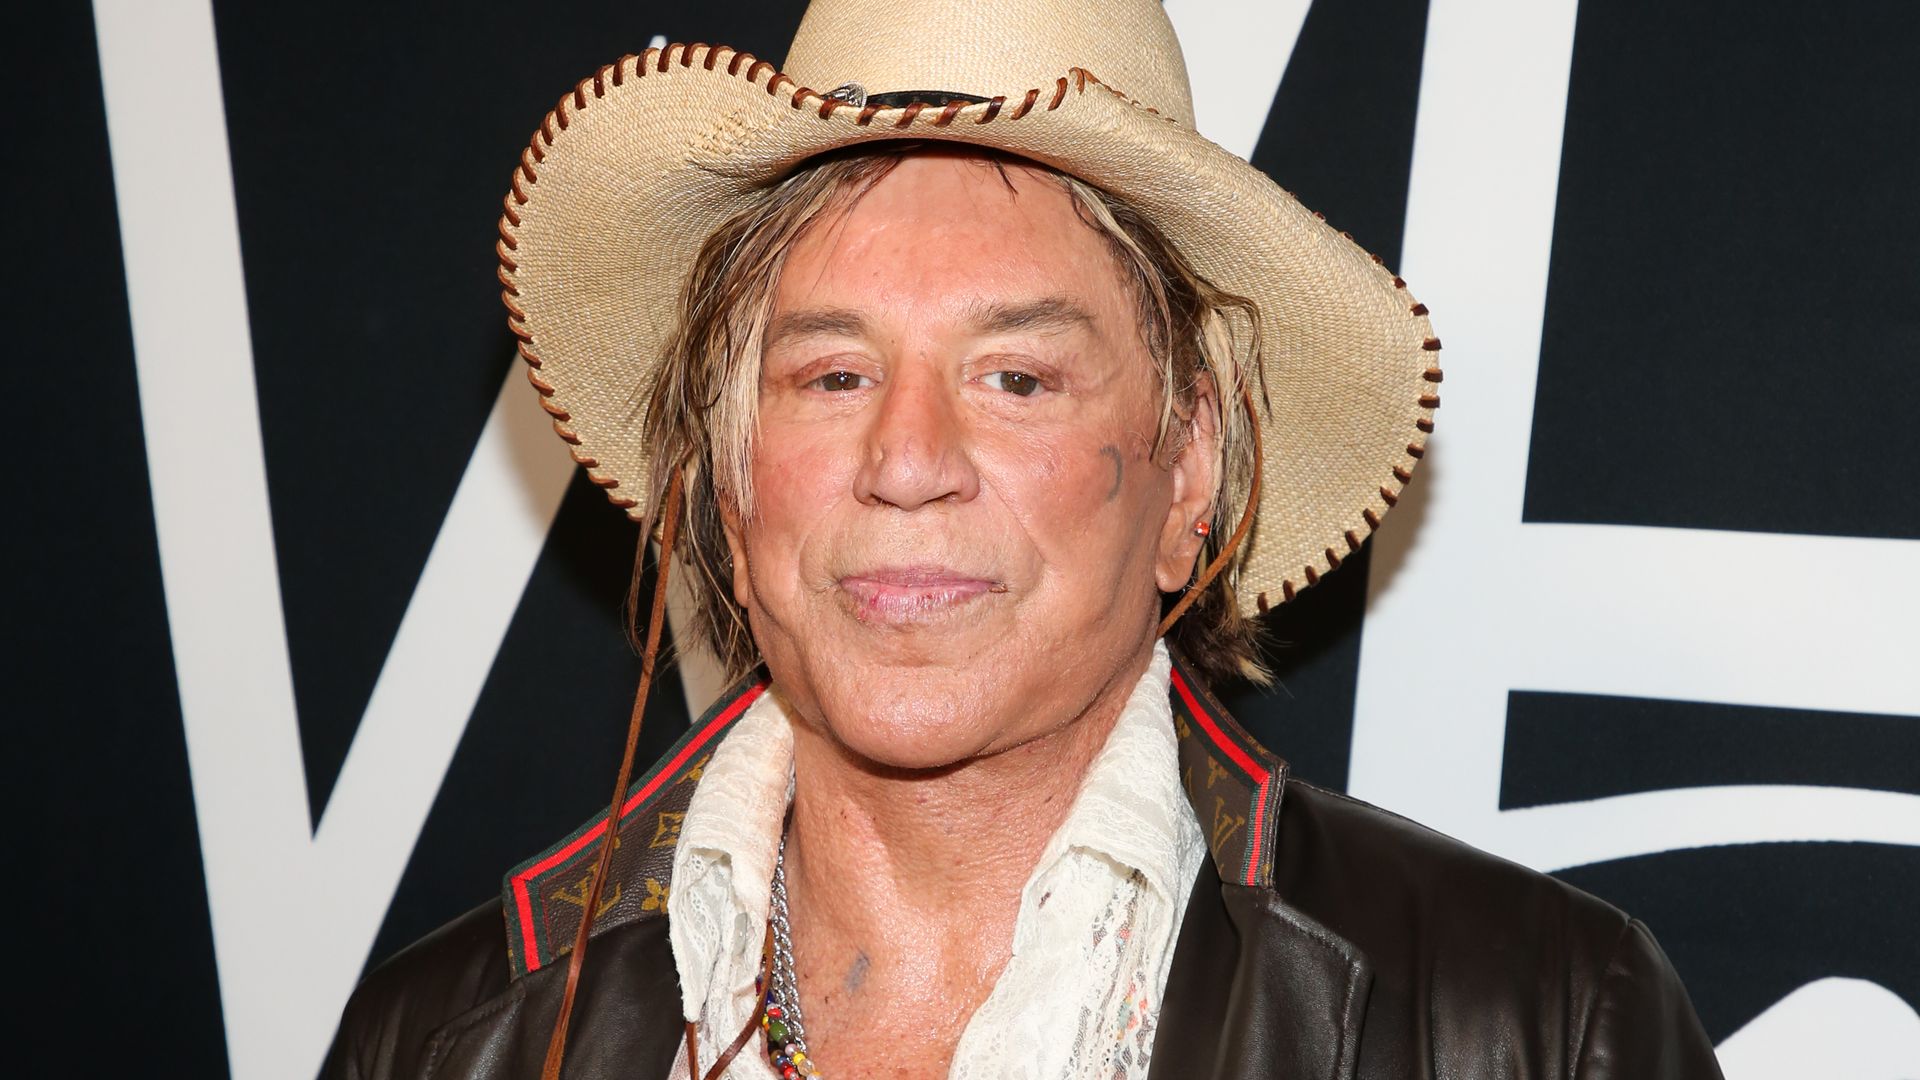 Mickey Rourke at red carpet event wearing a cream hat and brown leather jacket